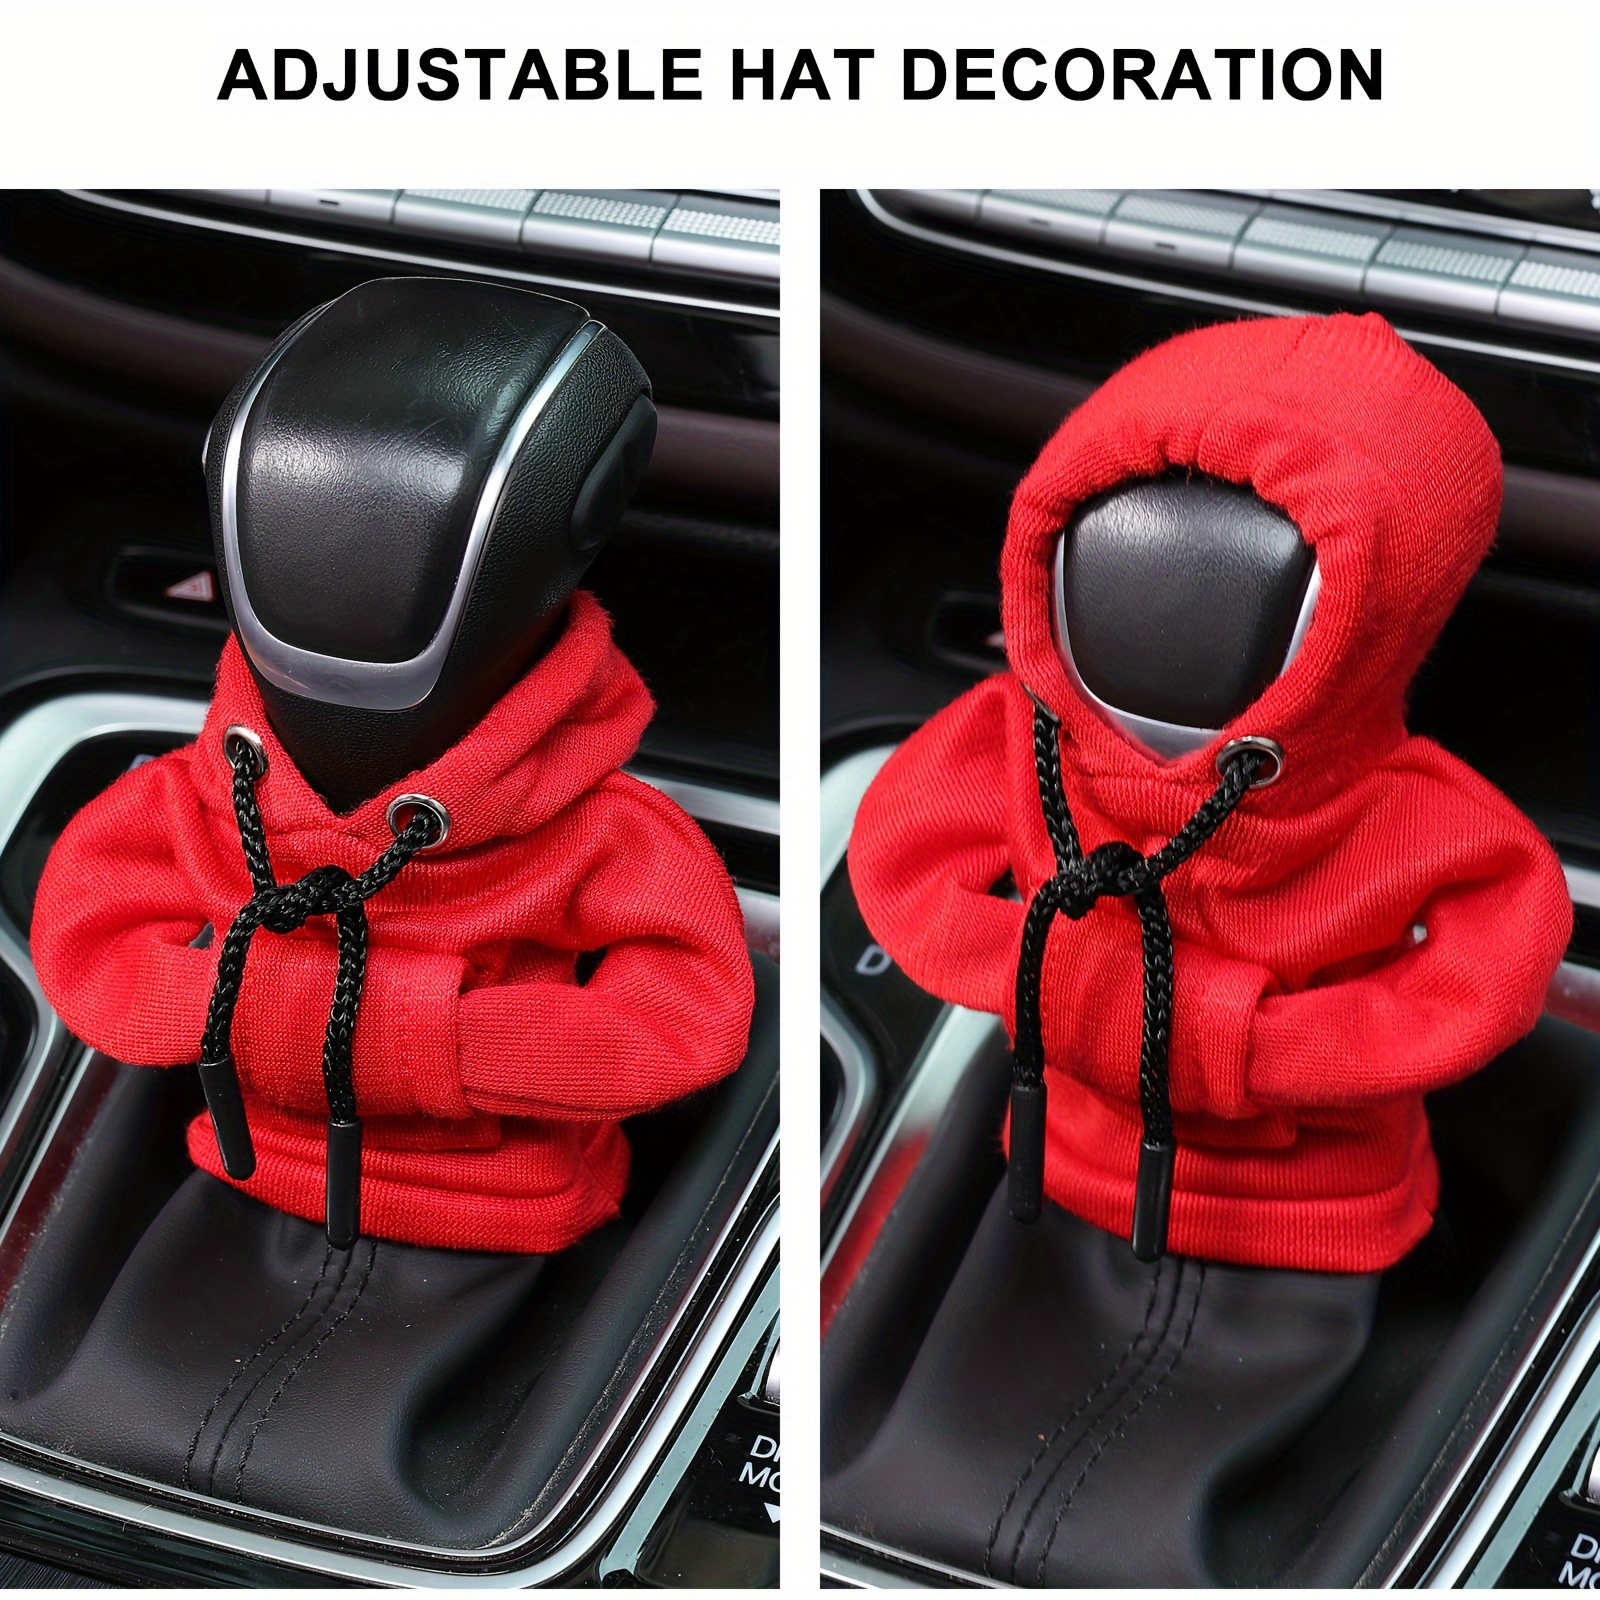 Large Size Universal Car Gear Shift Cover Hoodie, Fashionable Mini Hooded Sweatshirt for Auto Gear Stick Shifter Knob, Interior Accessories Decor